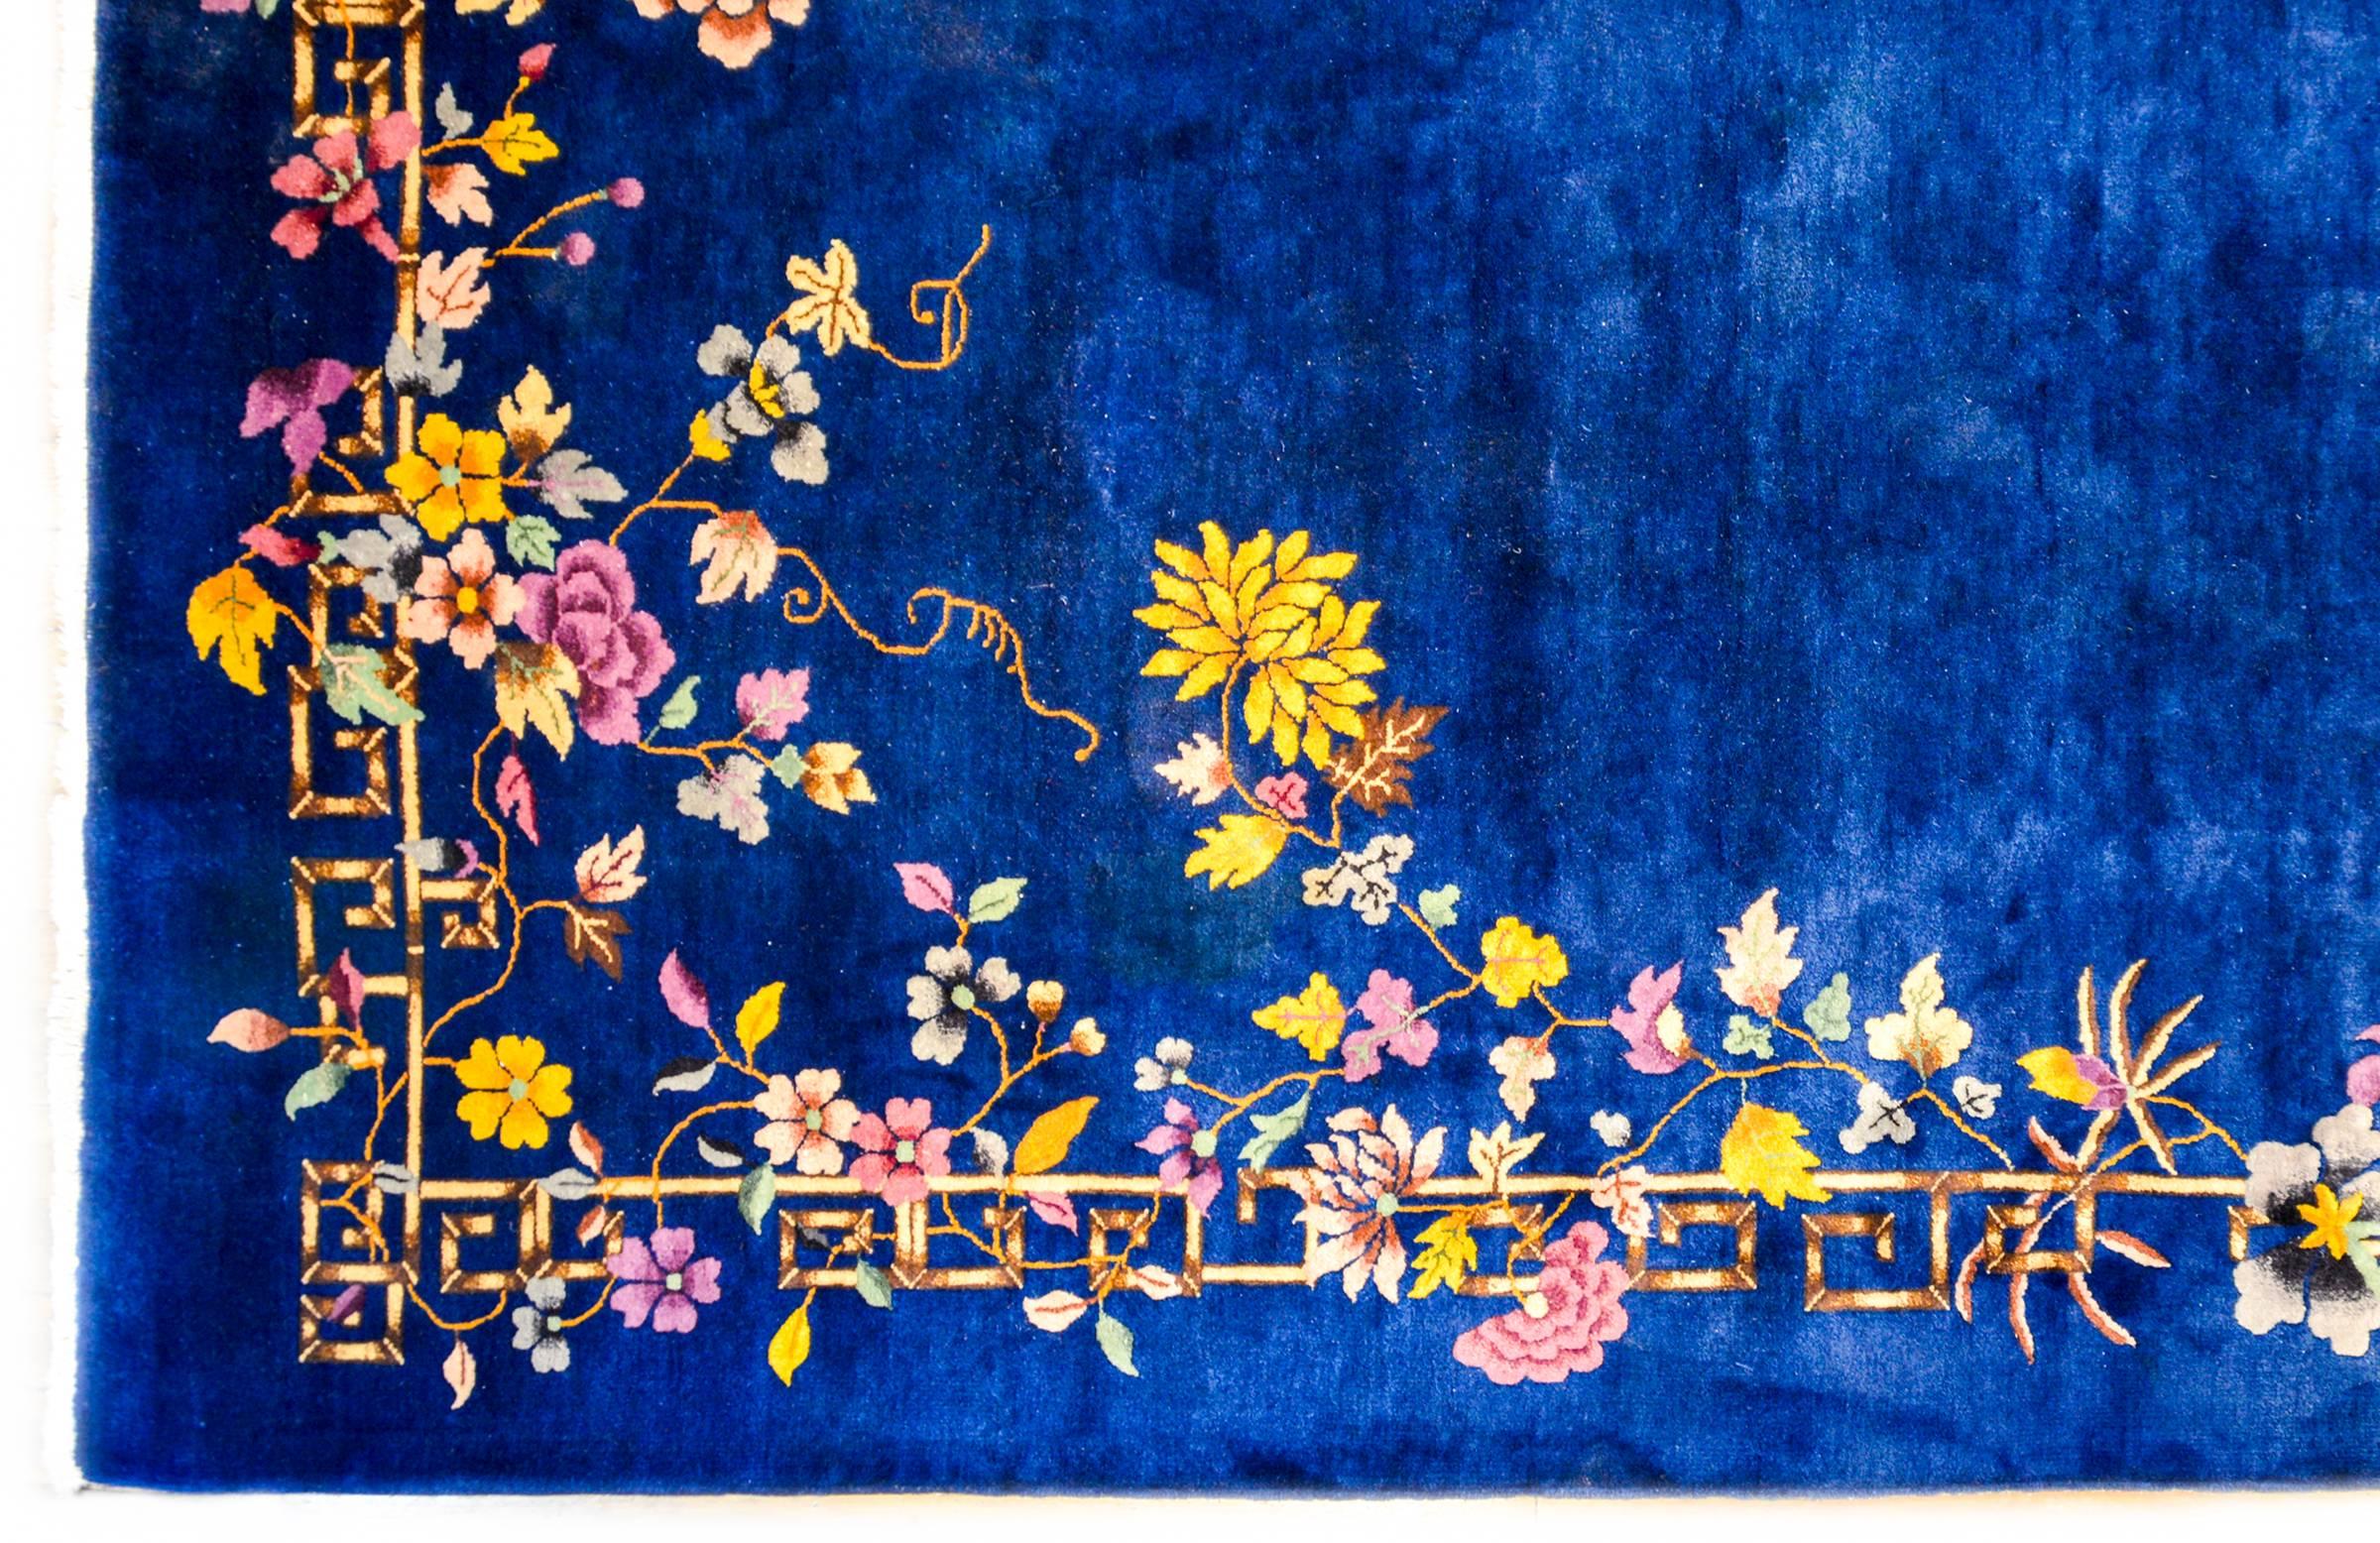 A fabulous early 20th century Chinese Art Deco rug with a rich deep indigo background surrounded by a stylized-dragon bamboo motif border, with multiple multicolored auspicious Chinese flowers including peonies, chrysanthemums, lotus and prunus.